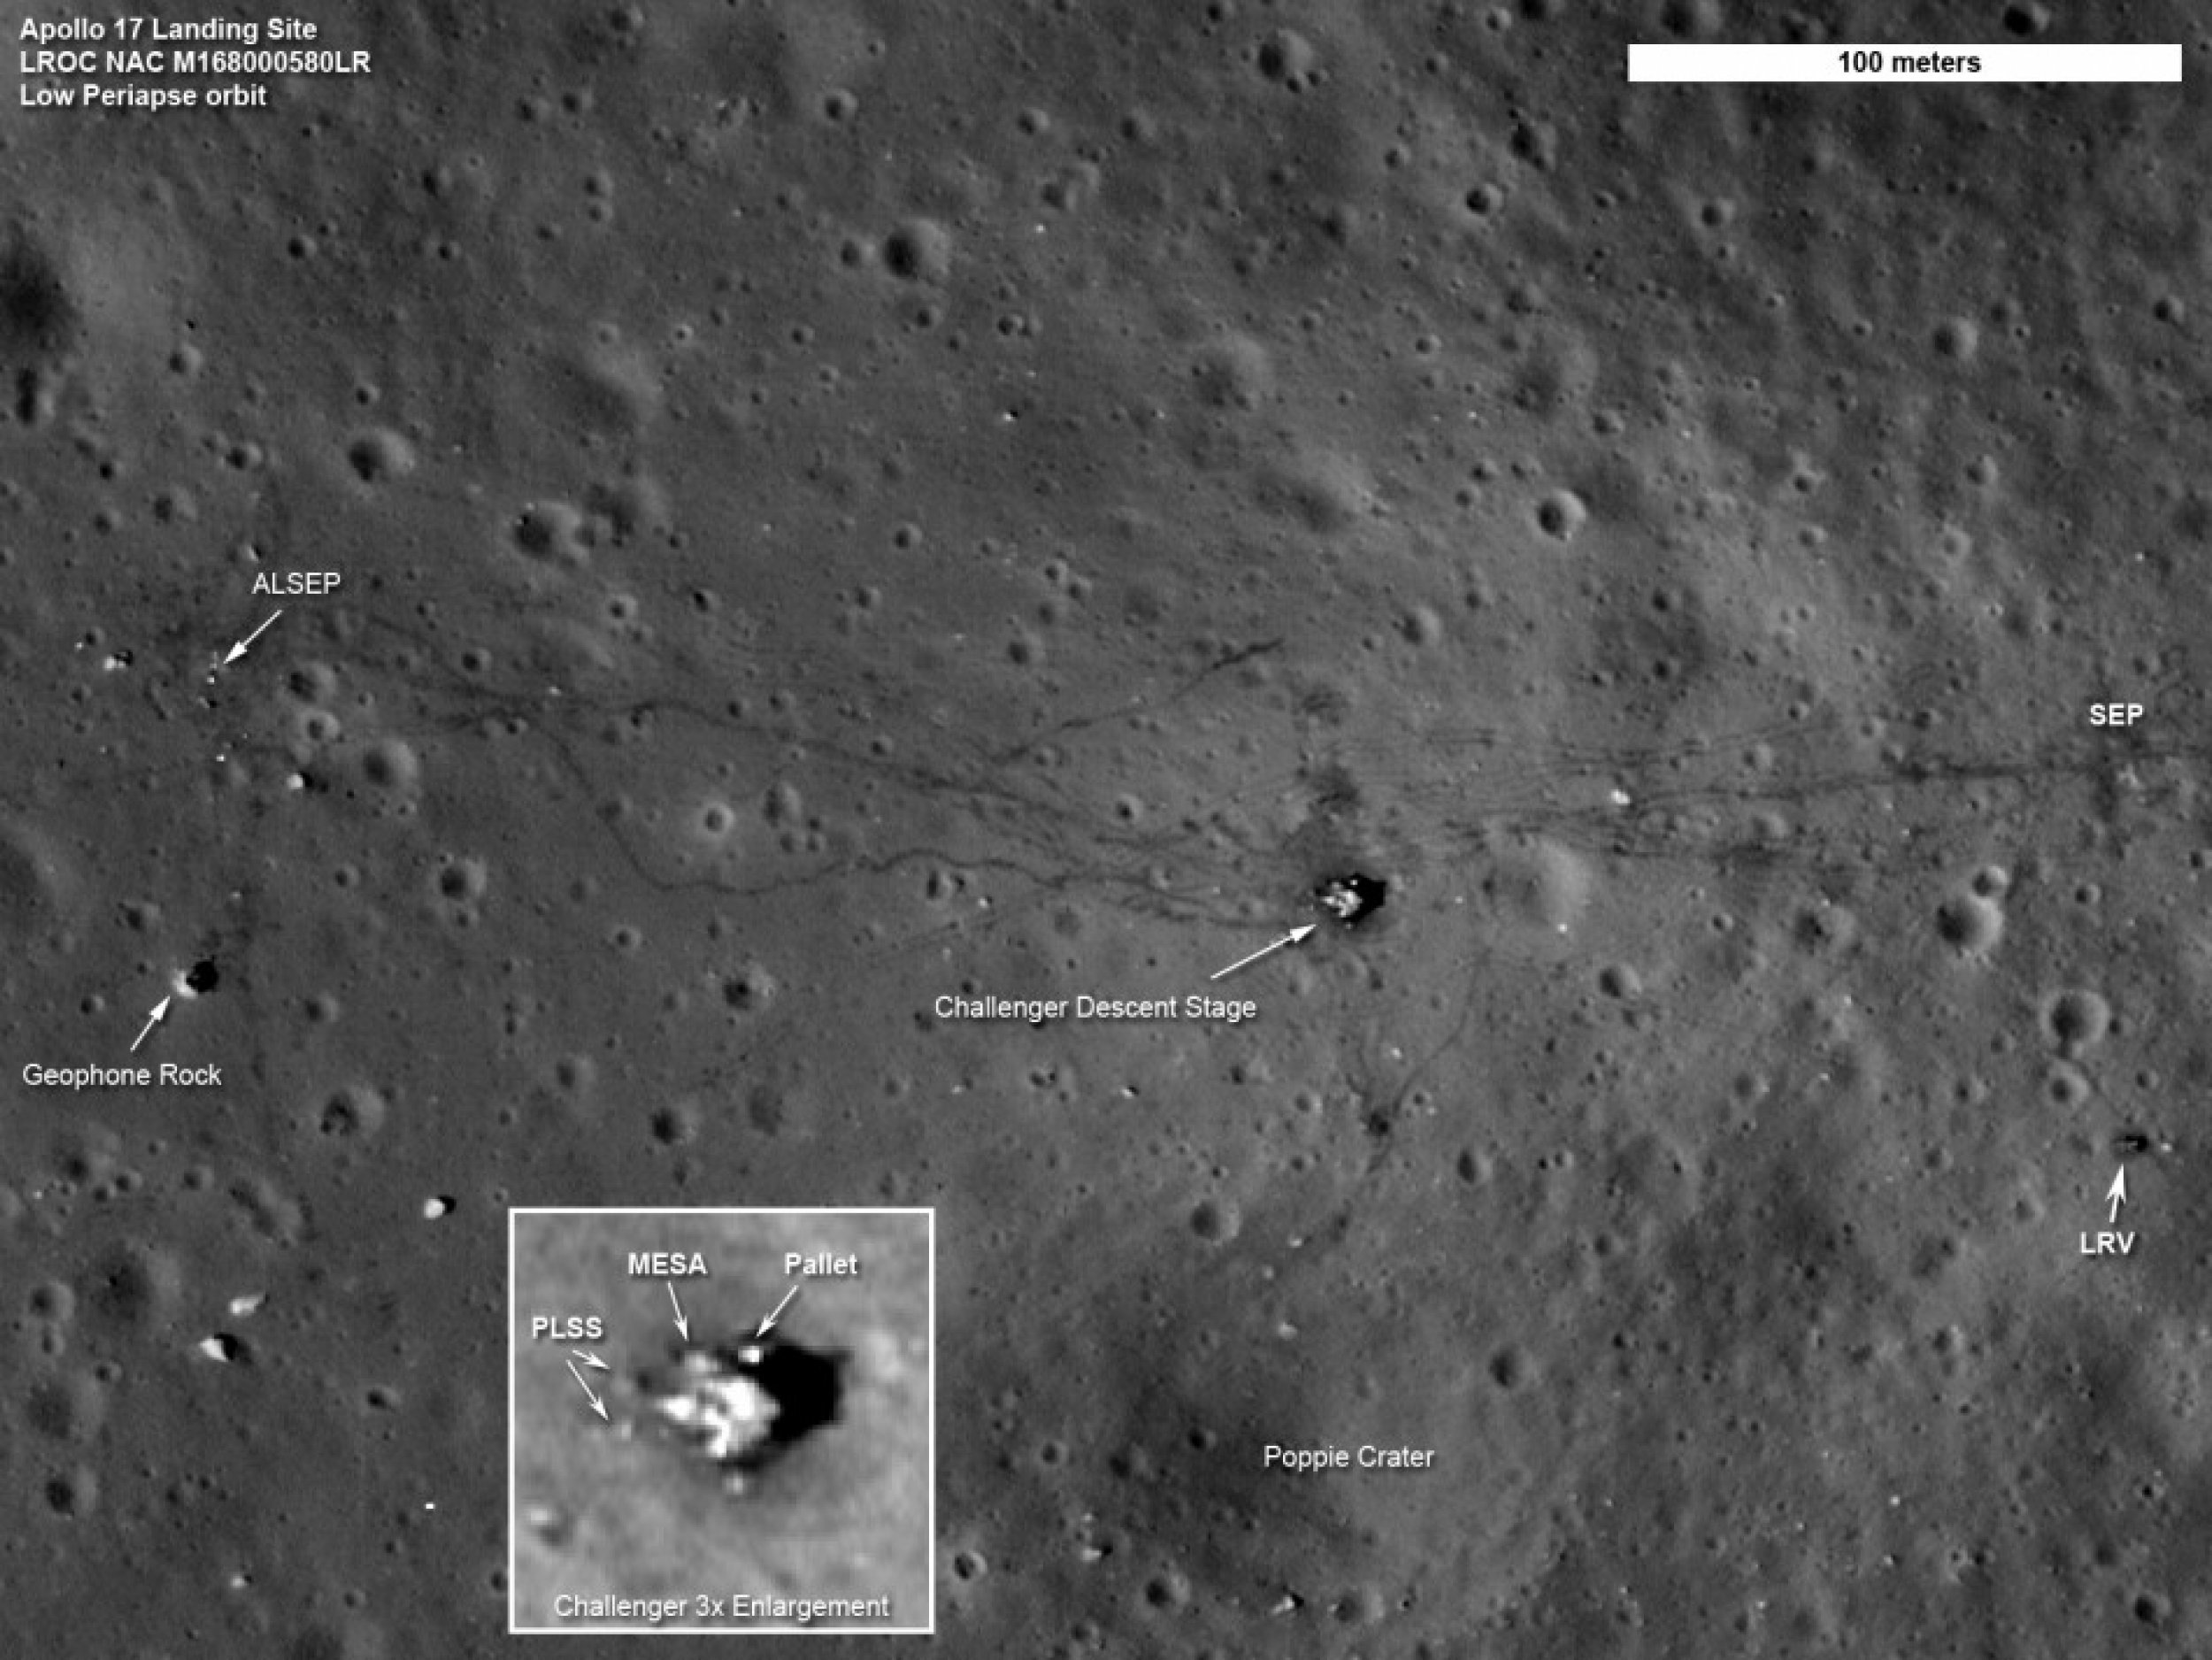 The twists and turns of the last tracks left by humans on the moon crisscross the surface in this LRO image of the Apollo 17 site.